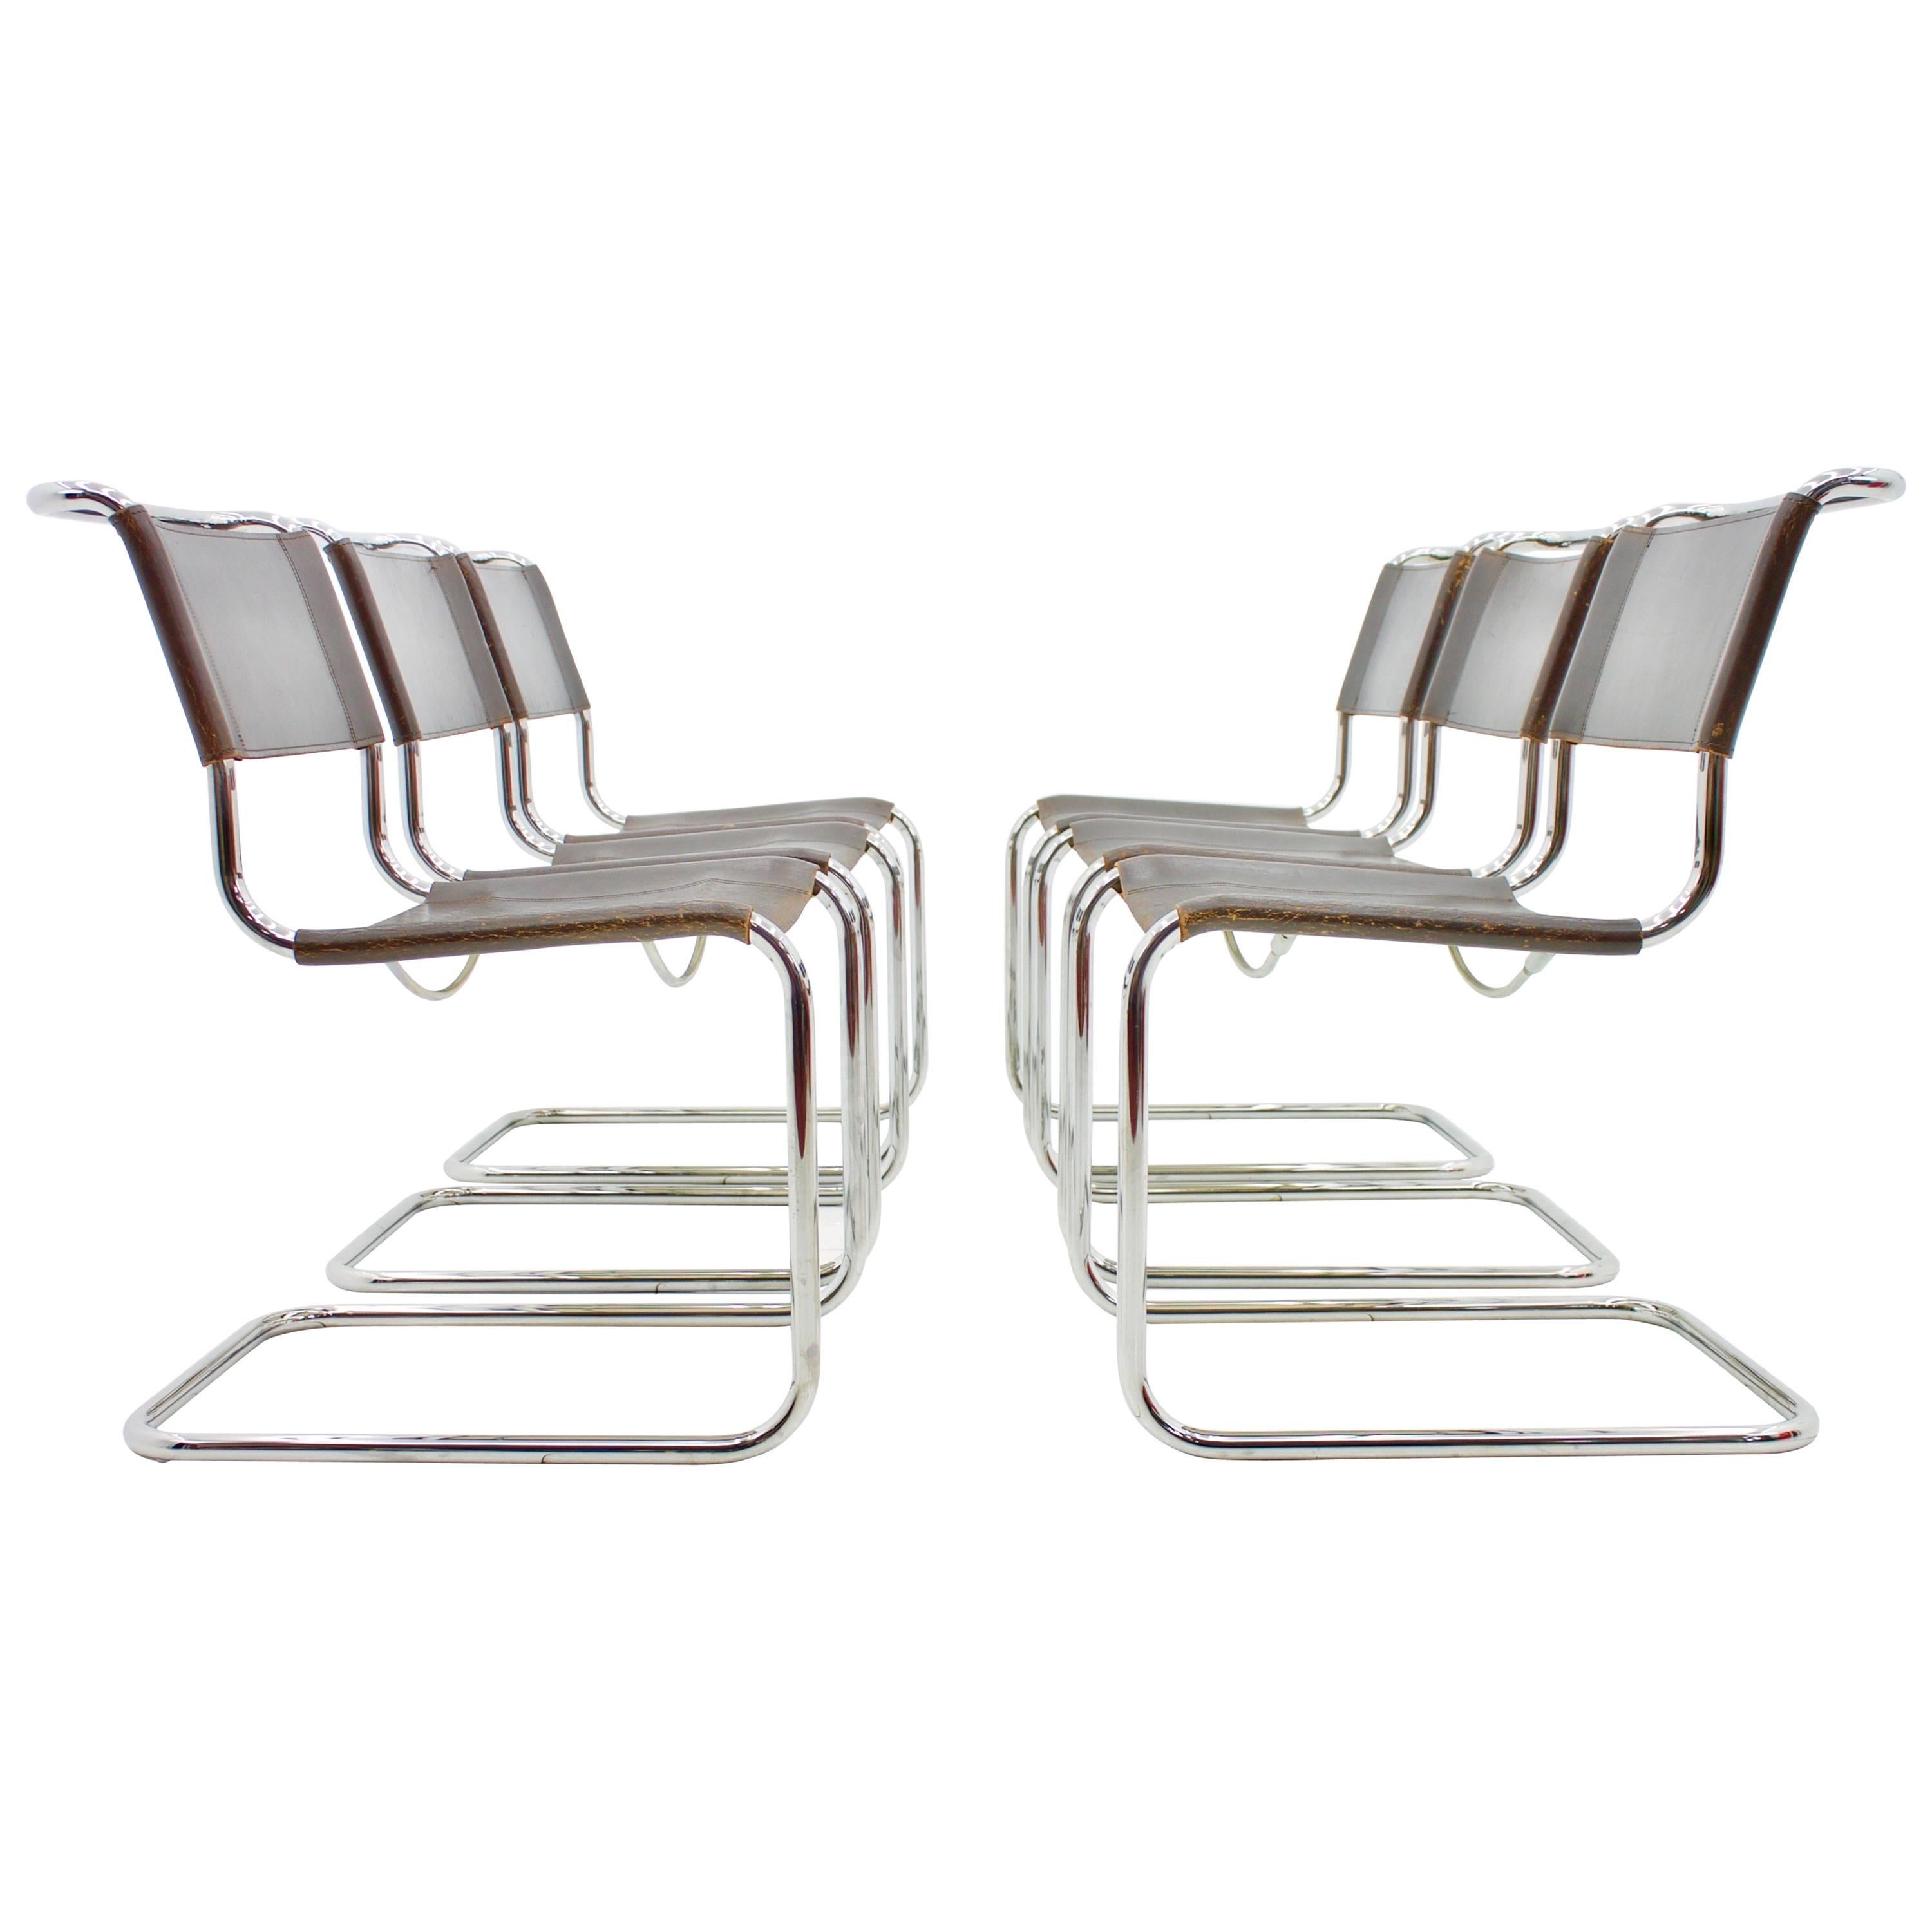 Mart Stam Steel Tube Dining Chair S33 by Thonet